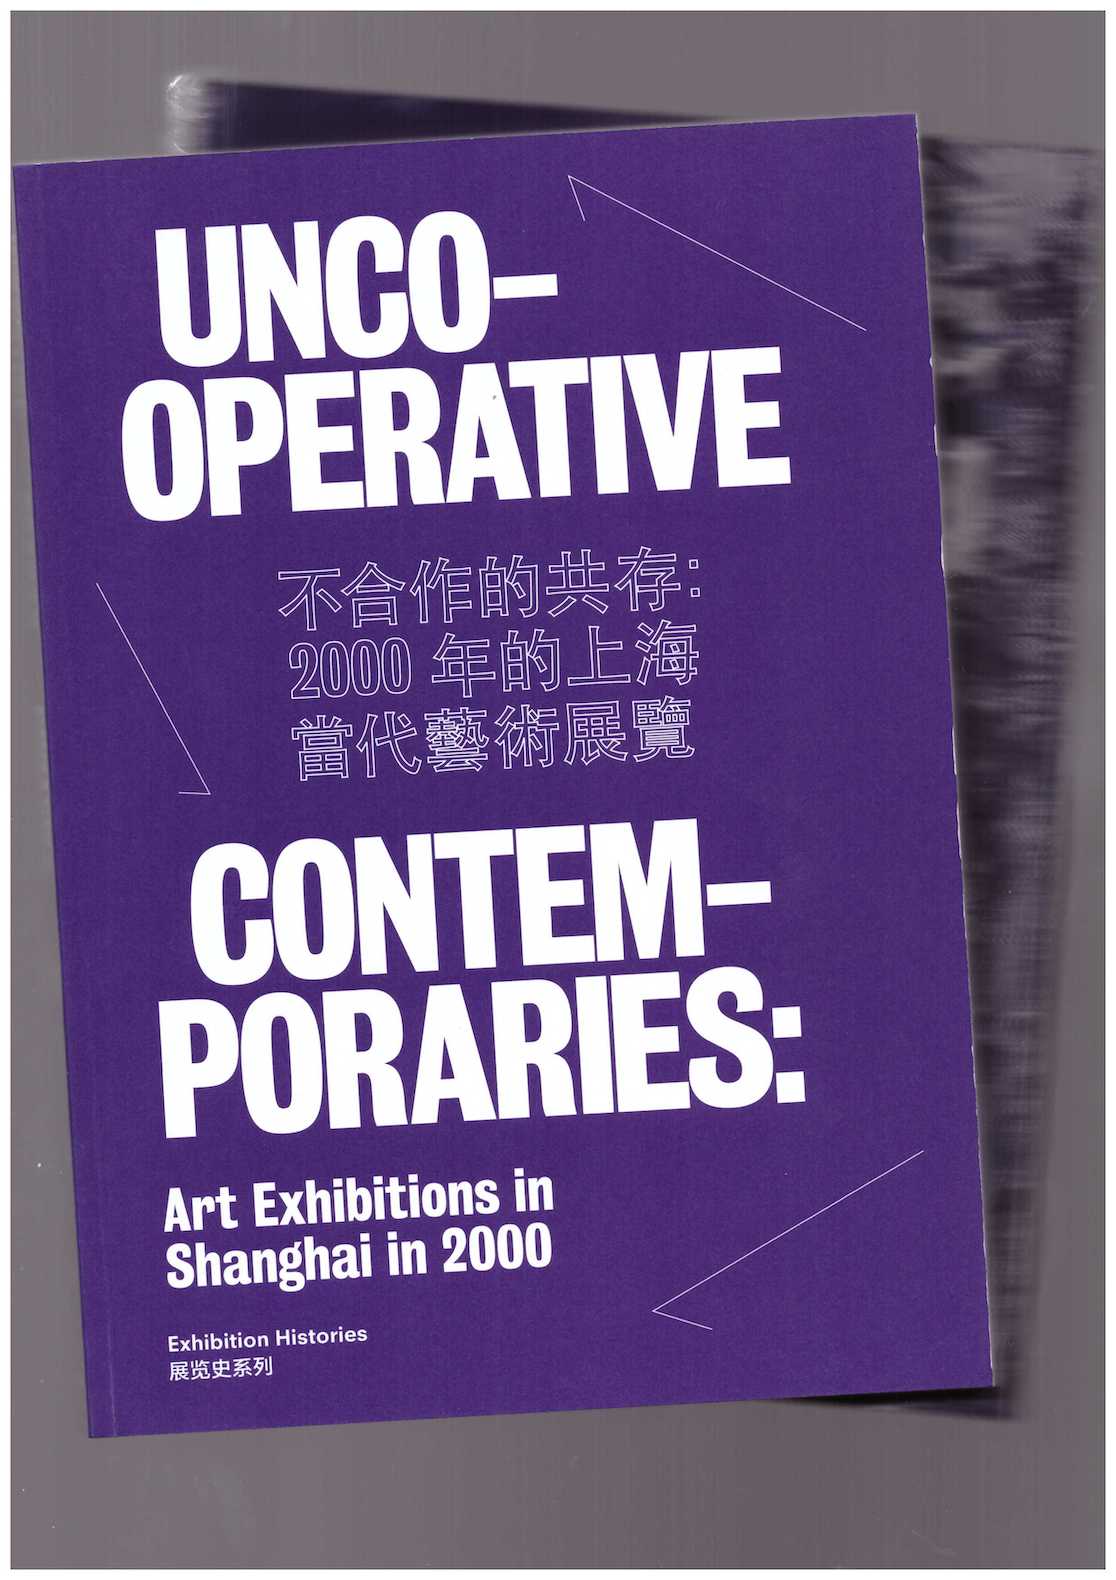 TAIN, John; YUNG, Anthony (eds.) - Uncooperative Contemporaries: Art Exhibitions in Shanghai in 2000